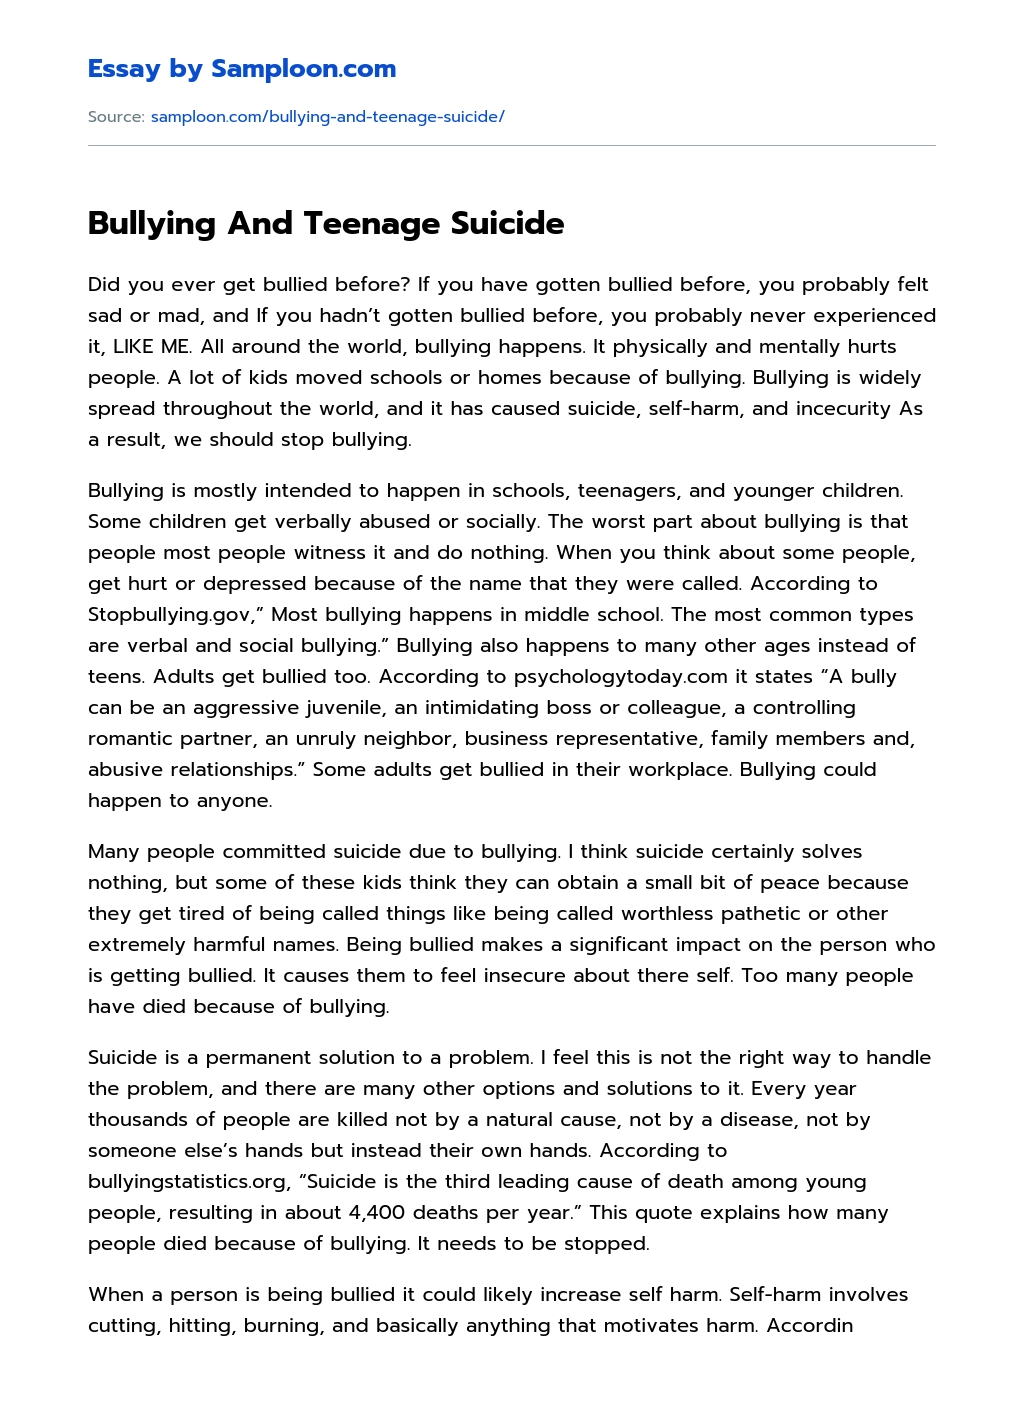 Bullying And Teenage Suicide essay